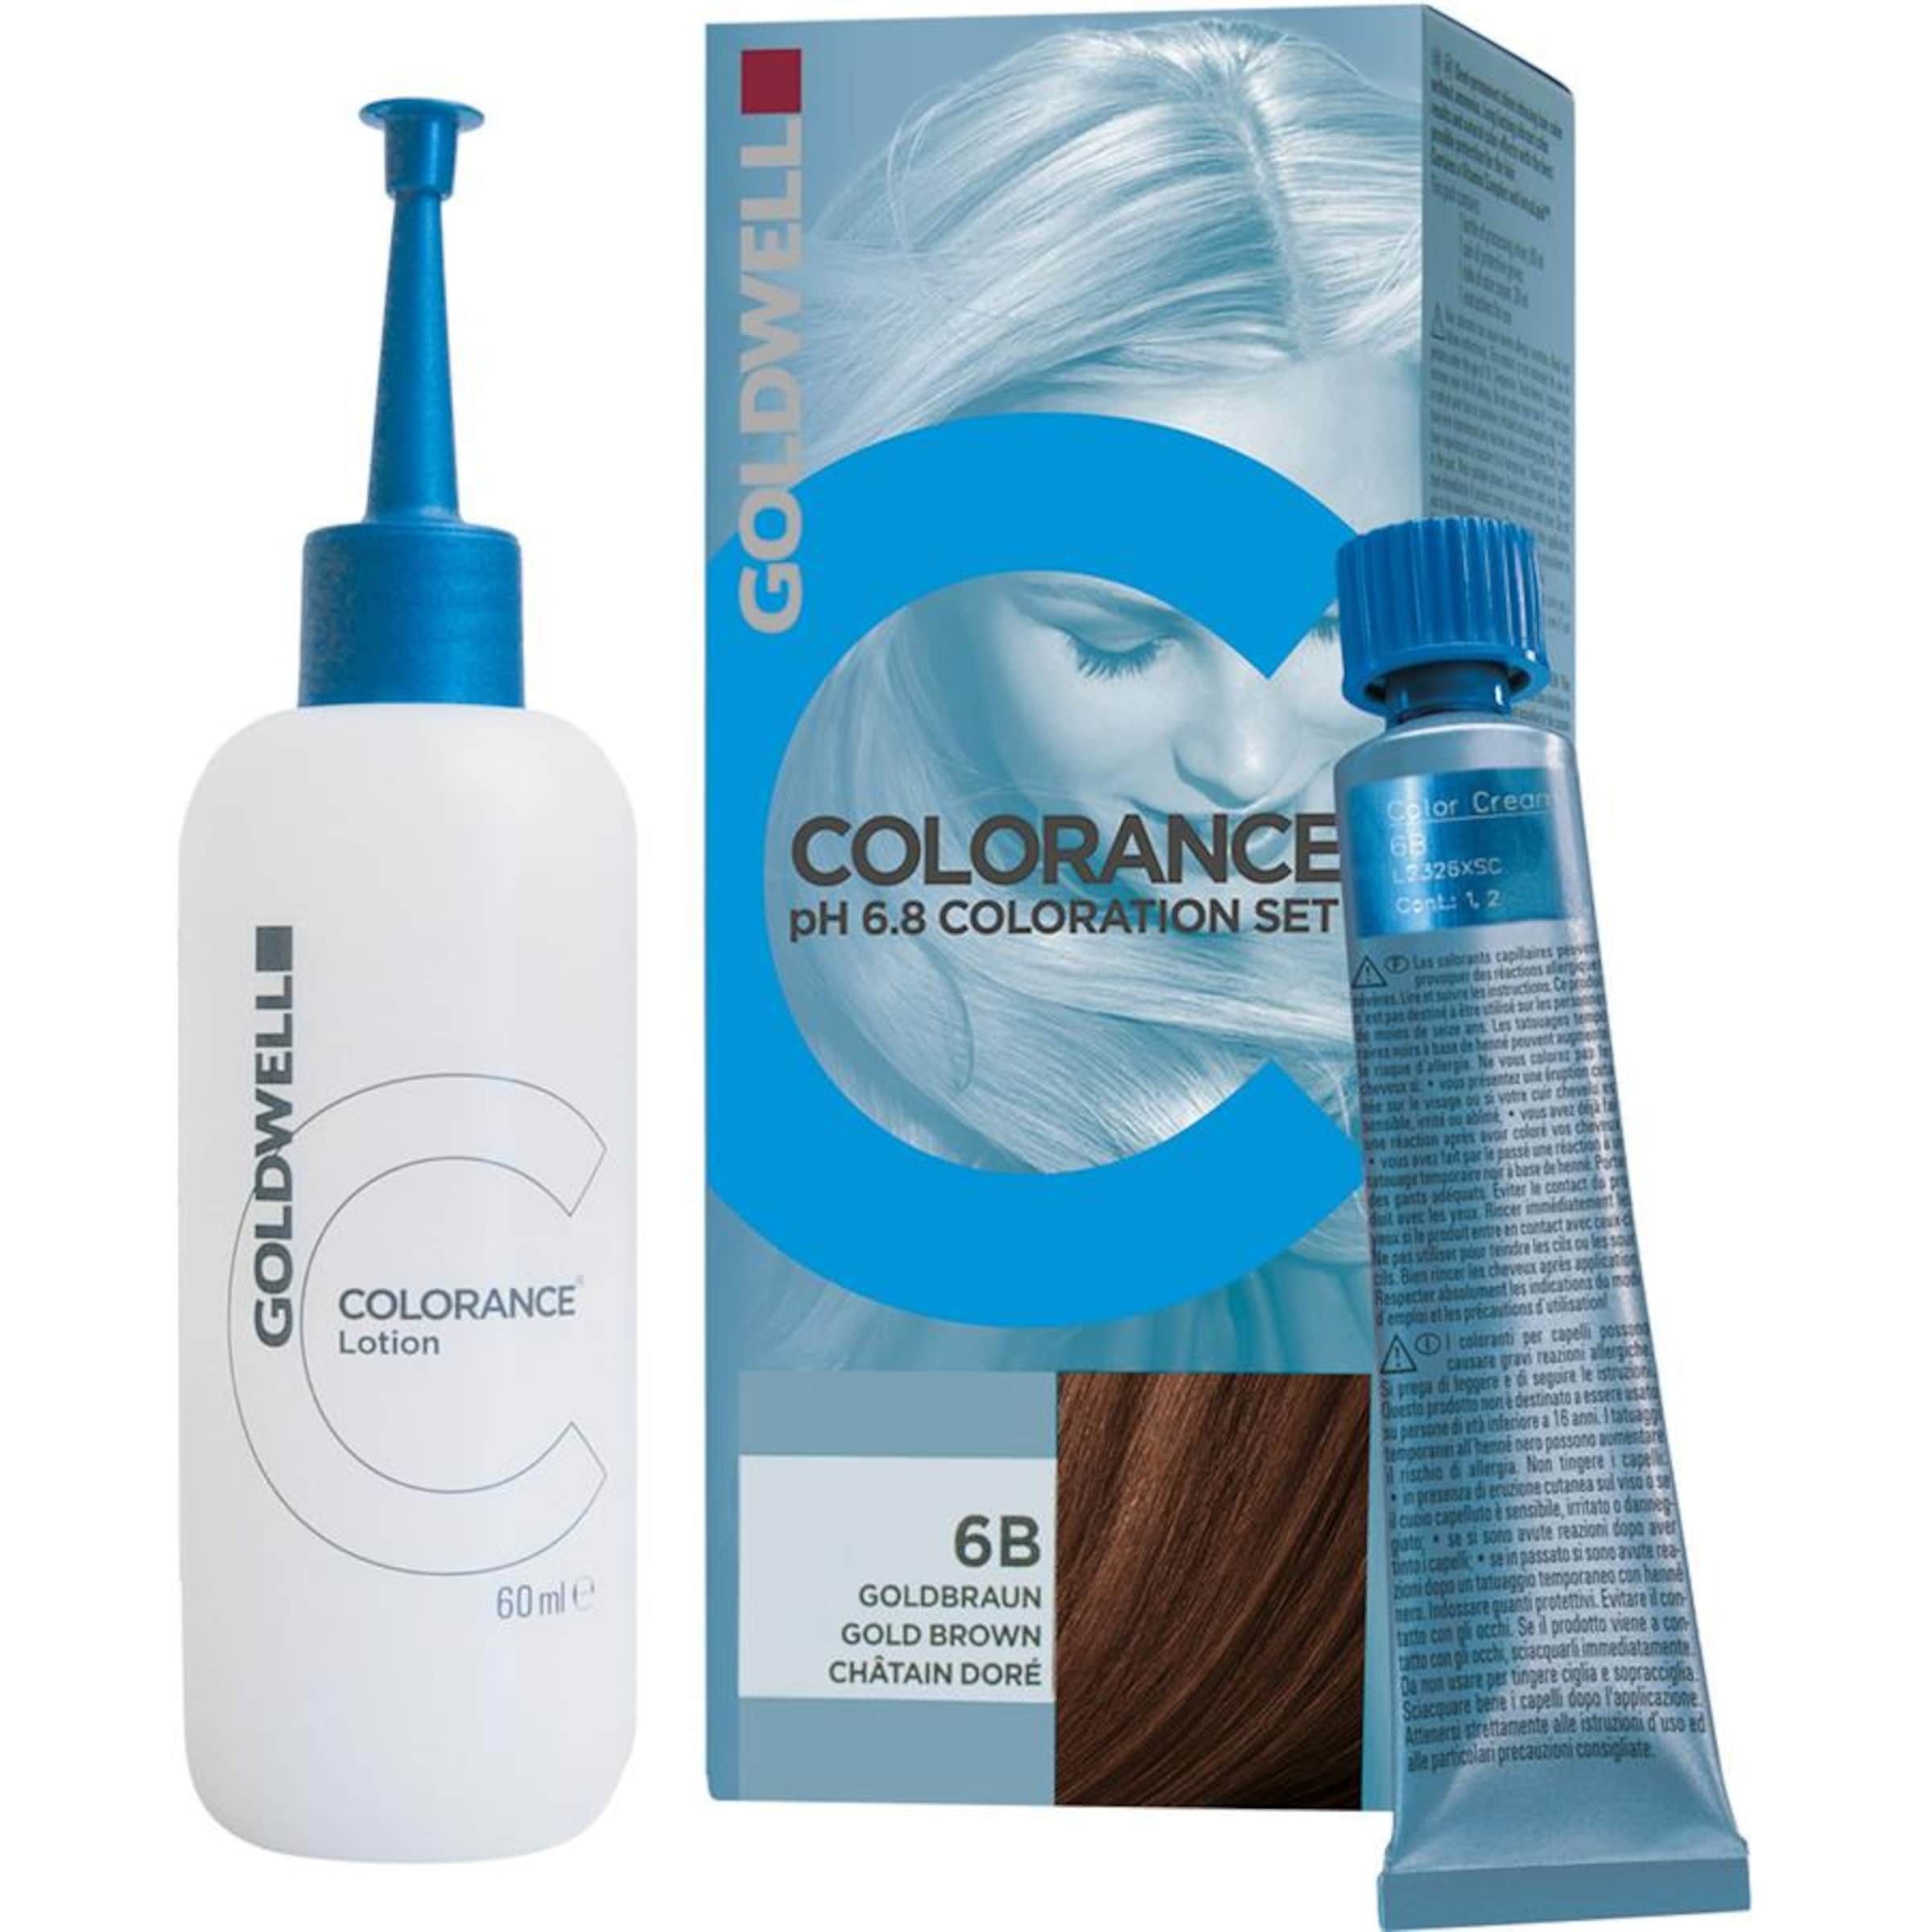 Goldwell Set PH 6,8 Coloration in 